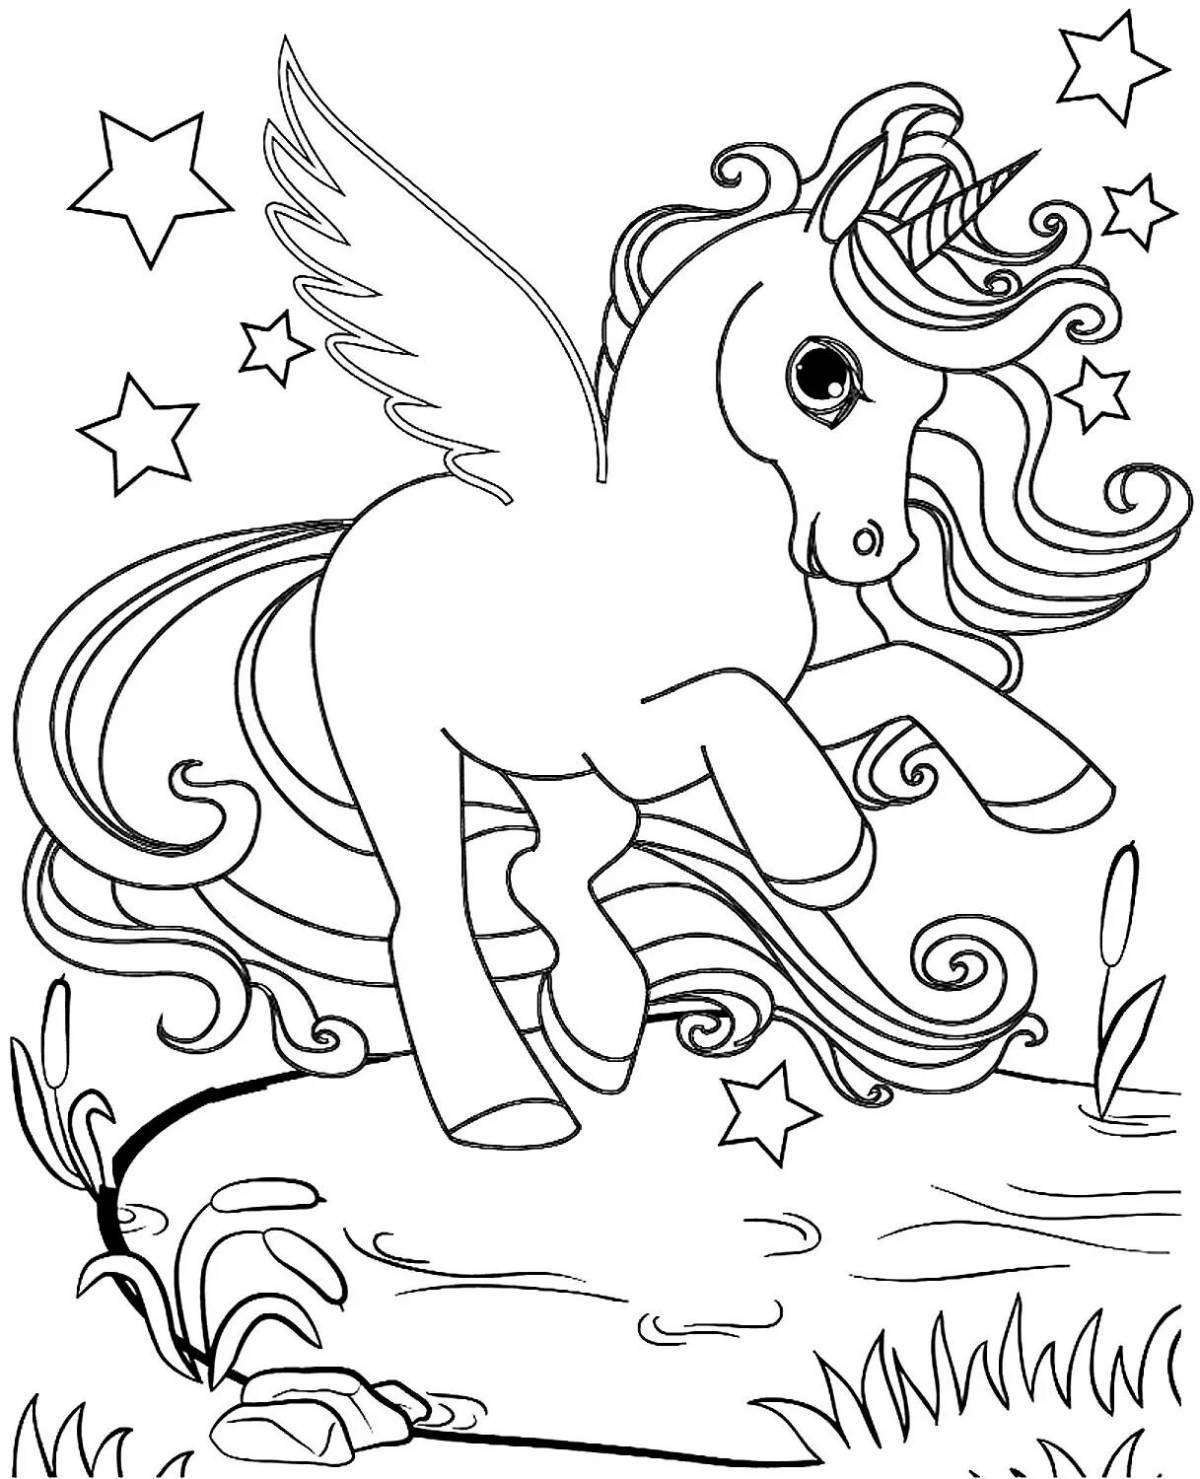 Glowing unicorn coloring page